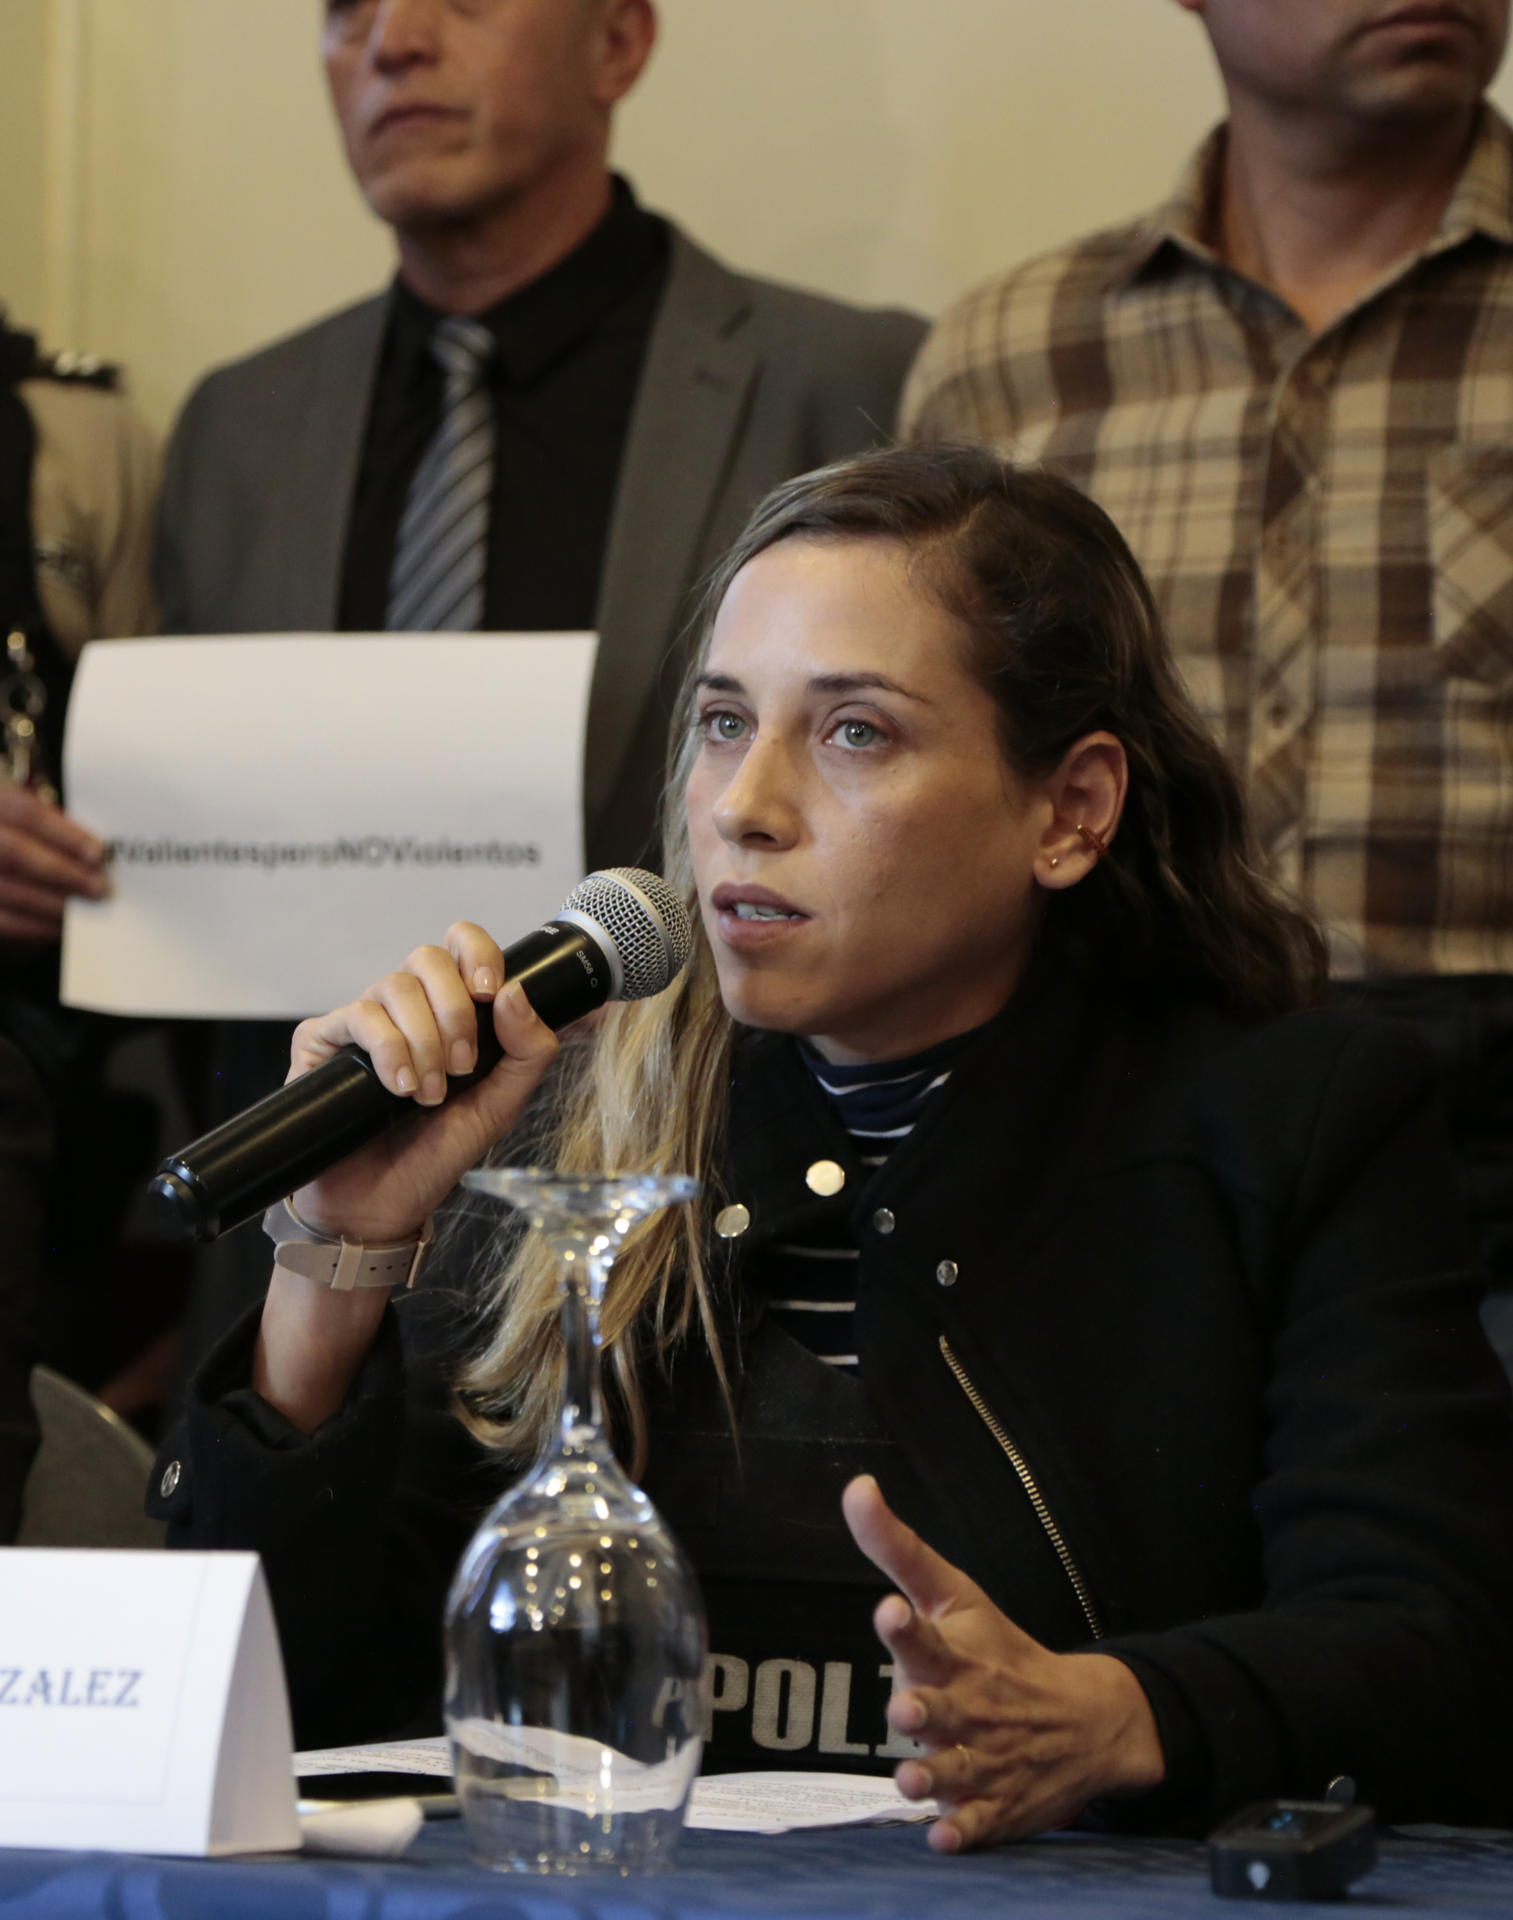 A file photo of Andrea Gonzalez Nader, who was the running mate of assassinated Ecuadorian presidential candidate Fernando Villavicencio. Their Construye party said on 12 August 2023 that Gonzalez Nader will step in as Villavicencio's replacement. EFE/ Santiago Fernandez/File